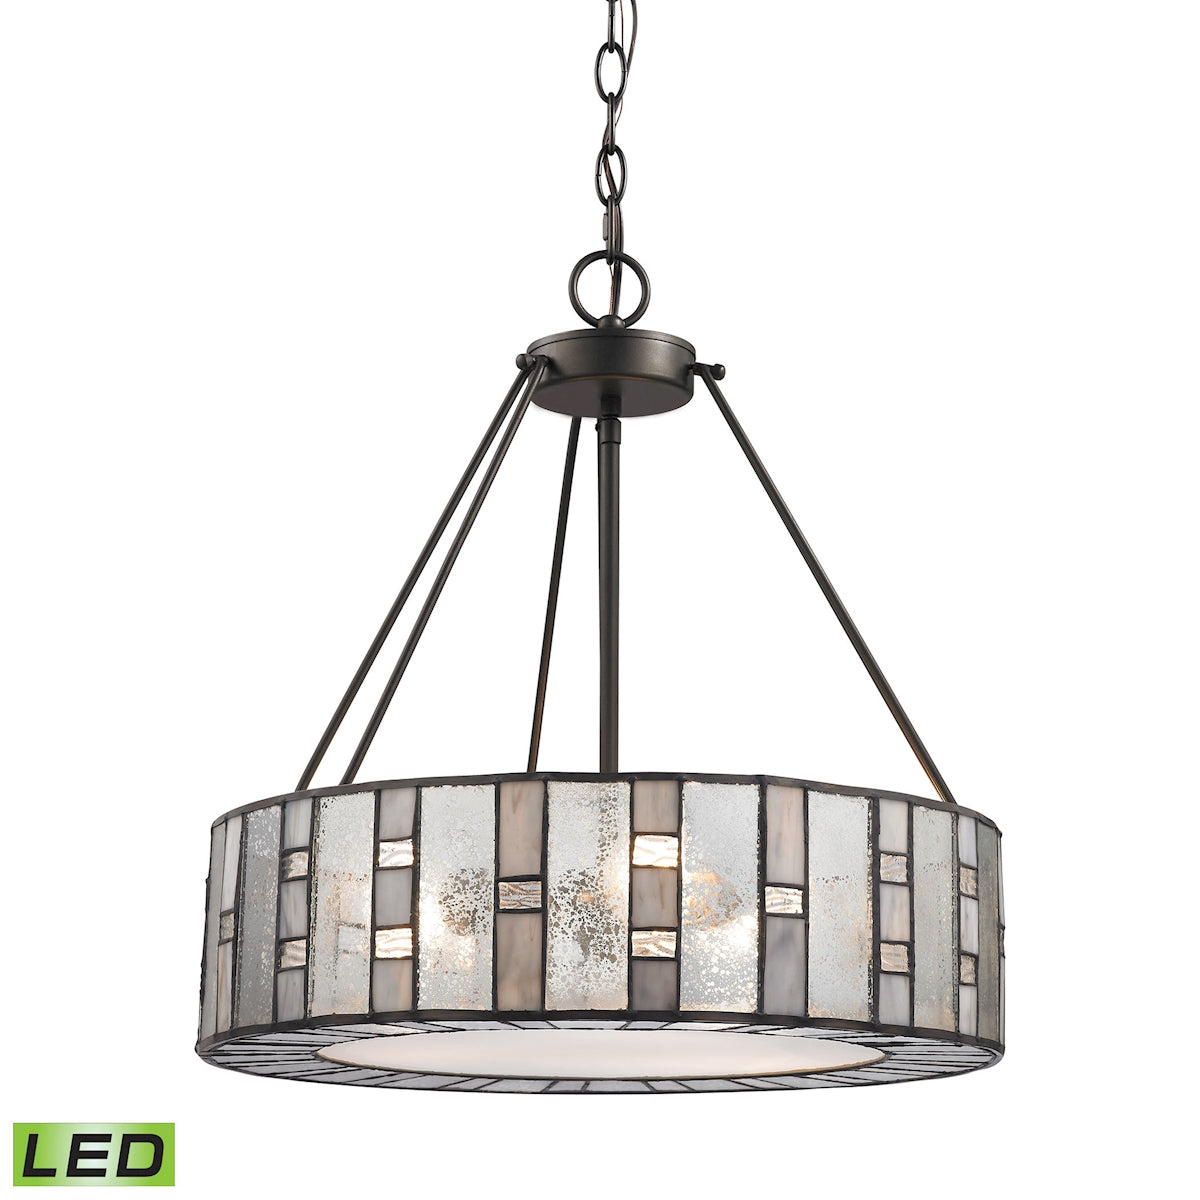 ELK Lighting 70212/3-LED Ethan 3-Light Chandelier in Tiffany Bronze with Rippled/Art/Mercury Glass - Includes LED Bulbs